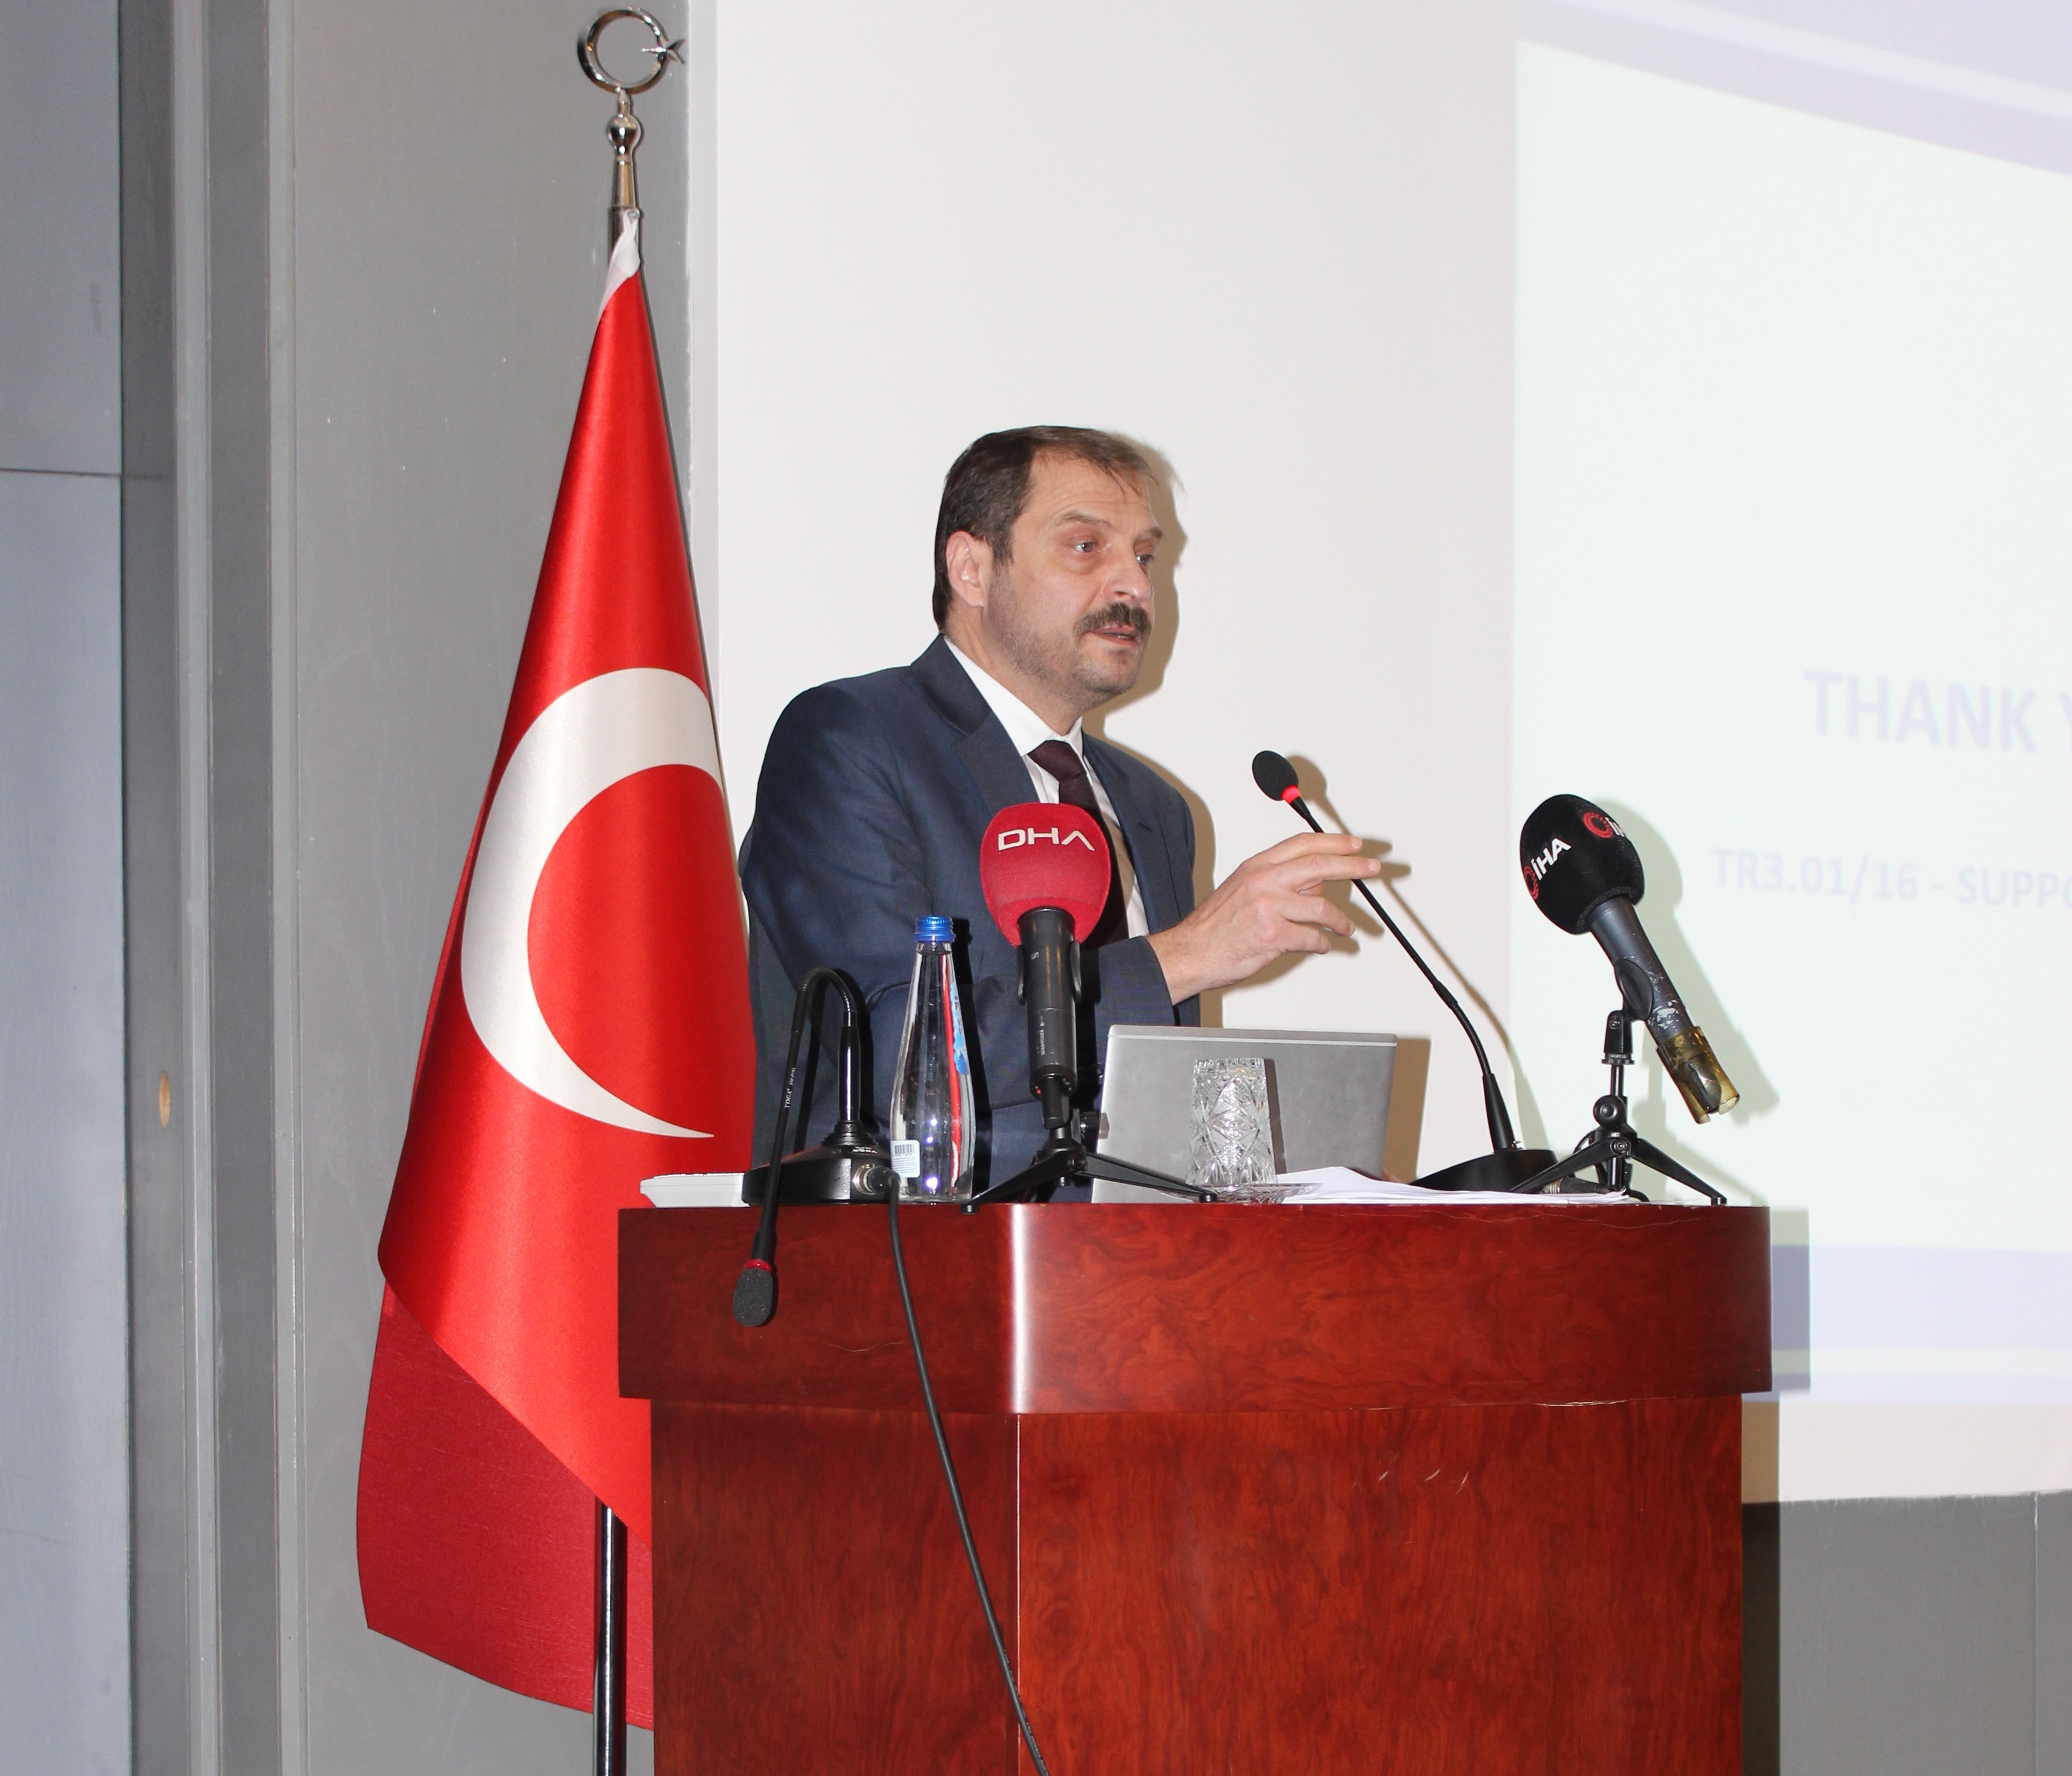 The Dissemination Meeting of the "Support to the Regulatory Authority of Turkey" Project